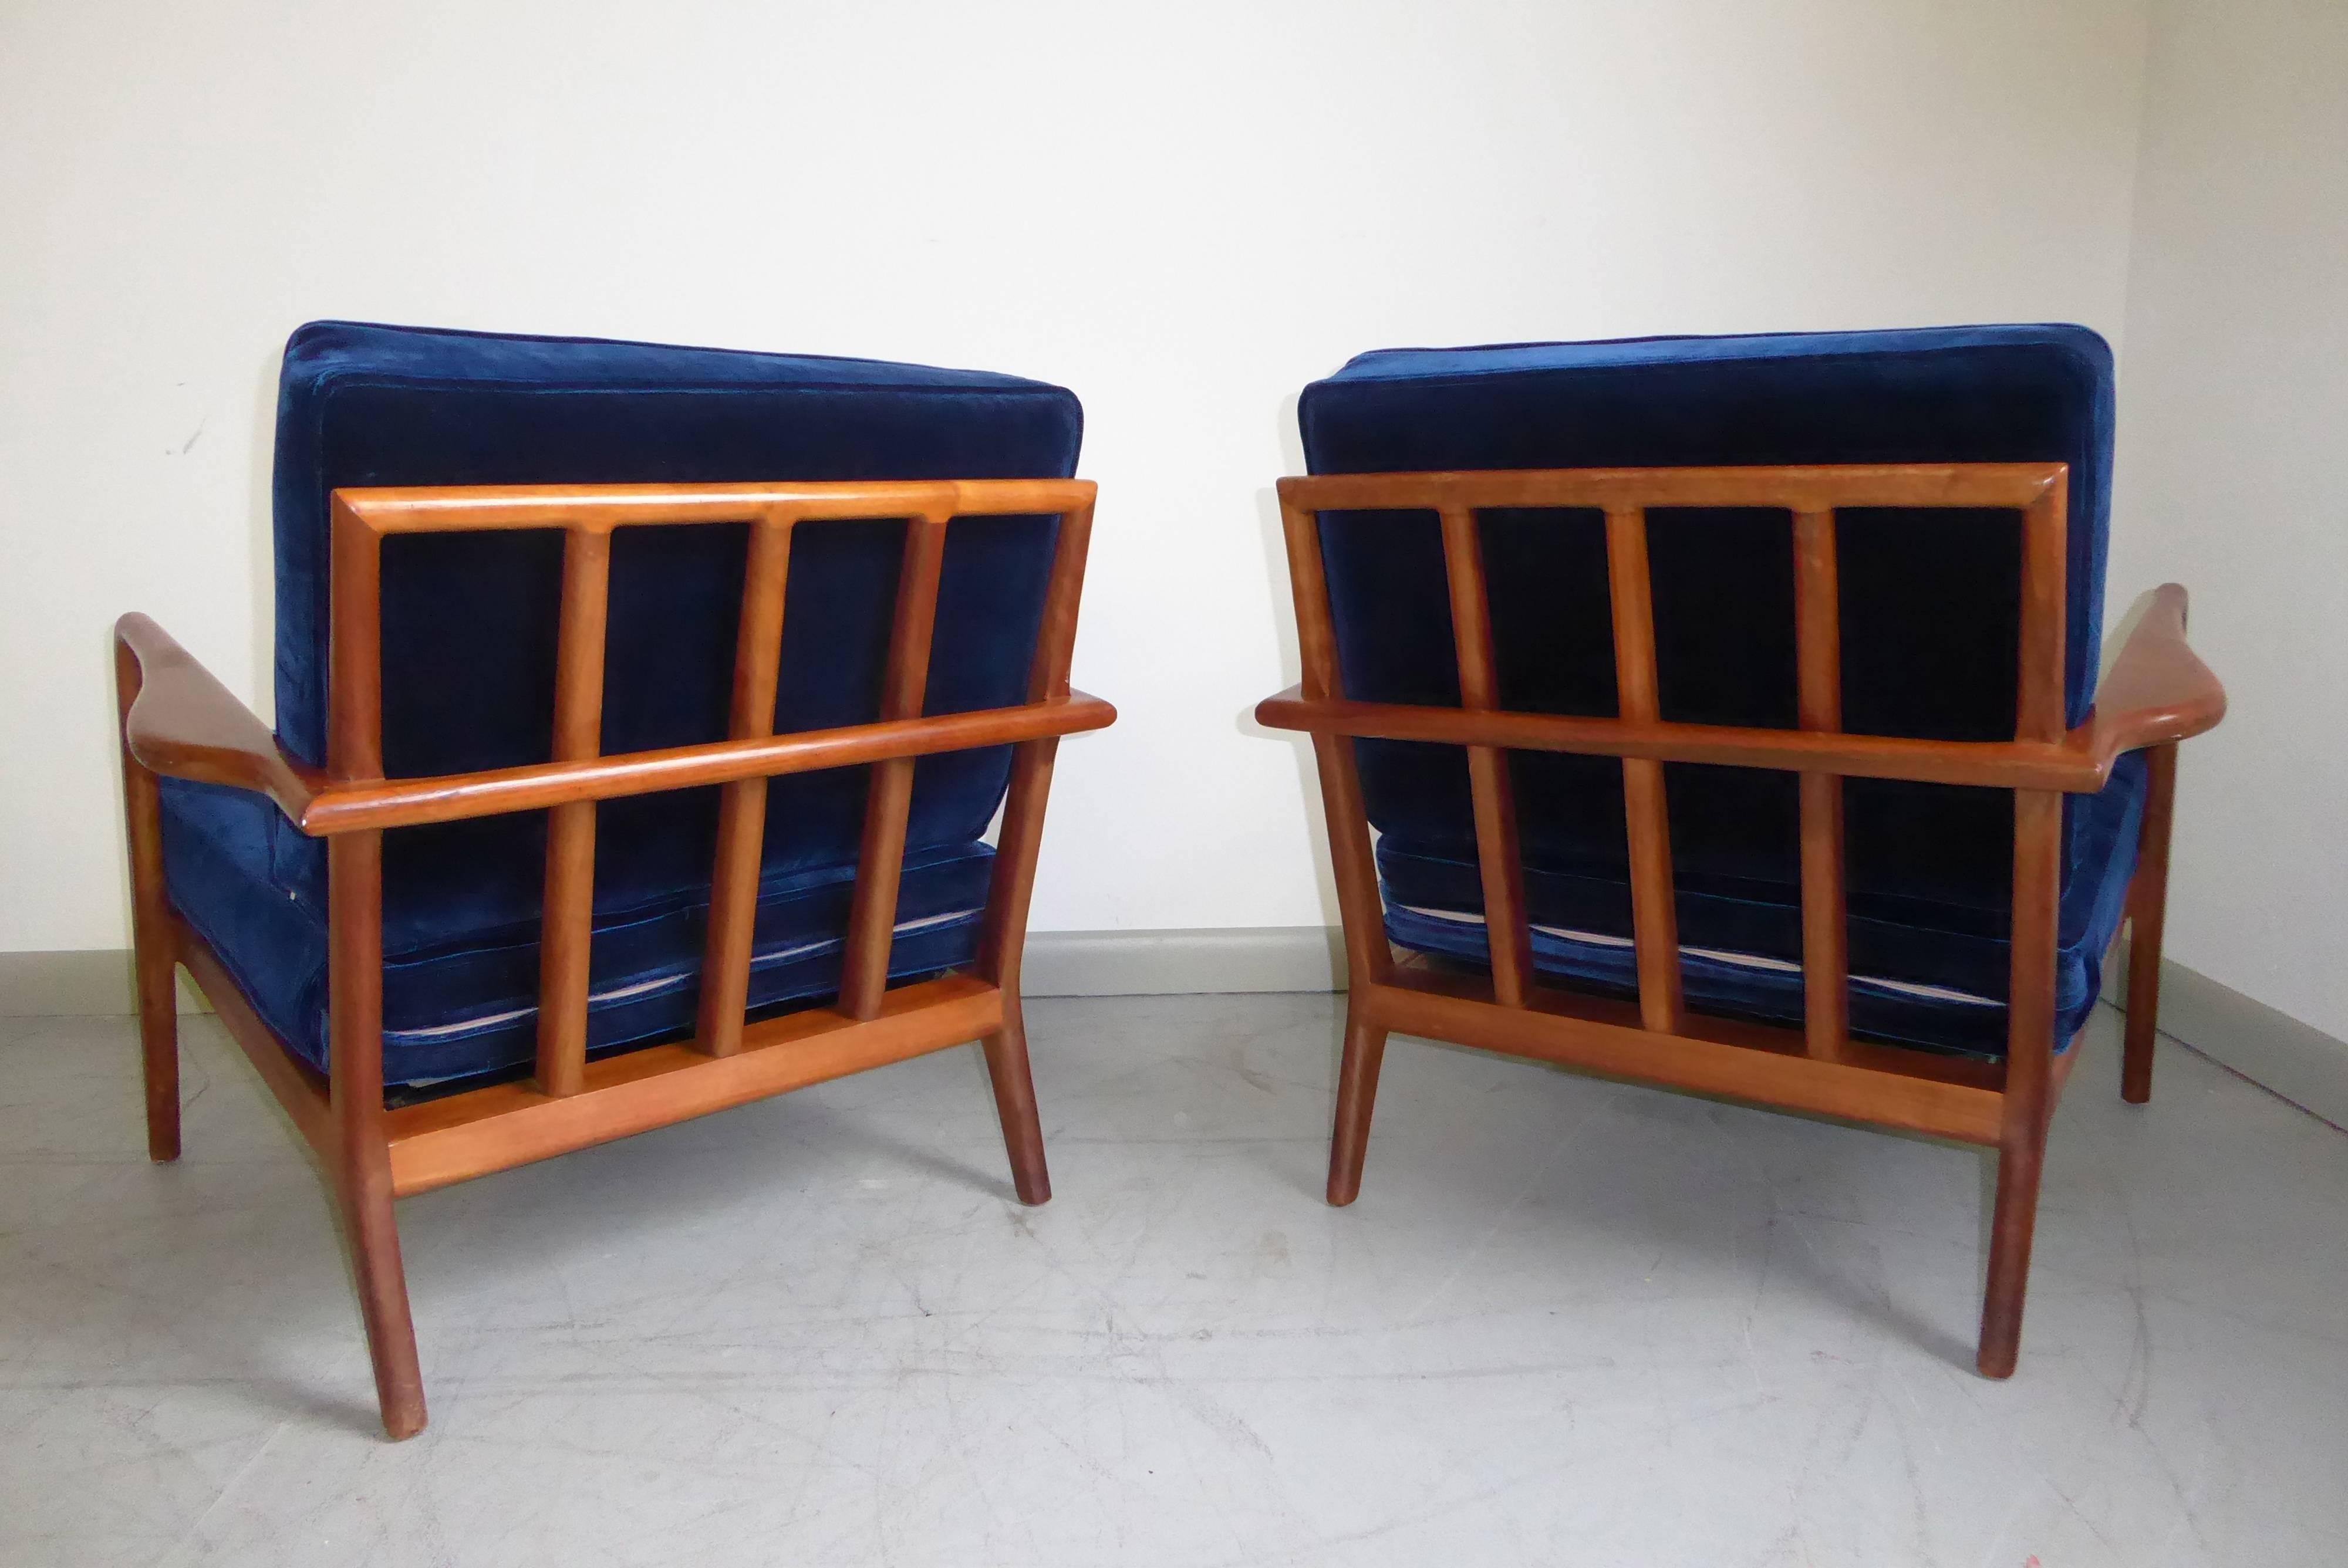 Gorgeous pair of sculptural walnut lounge chairs by Mel Smilow, 1960s. Newly reupholstered in a deep indigo velvet, this pair of chairs are stunning from all angles.